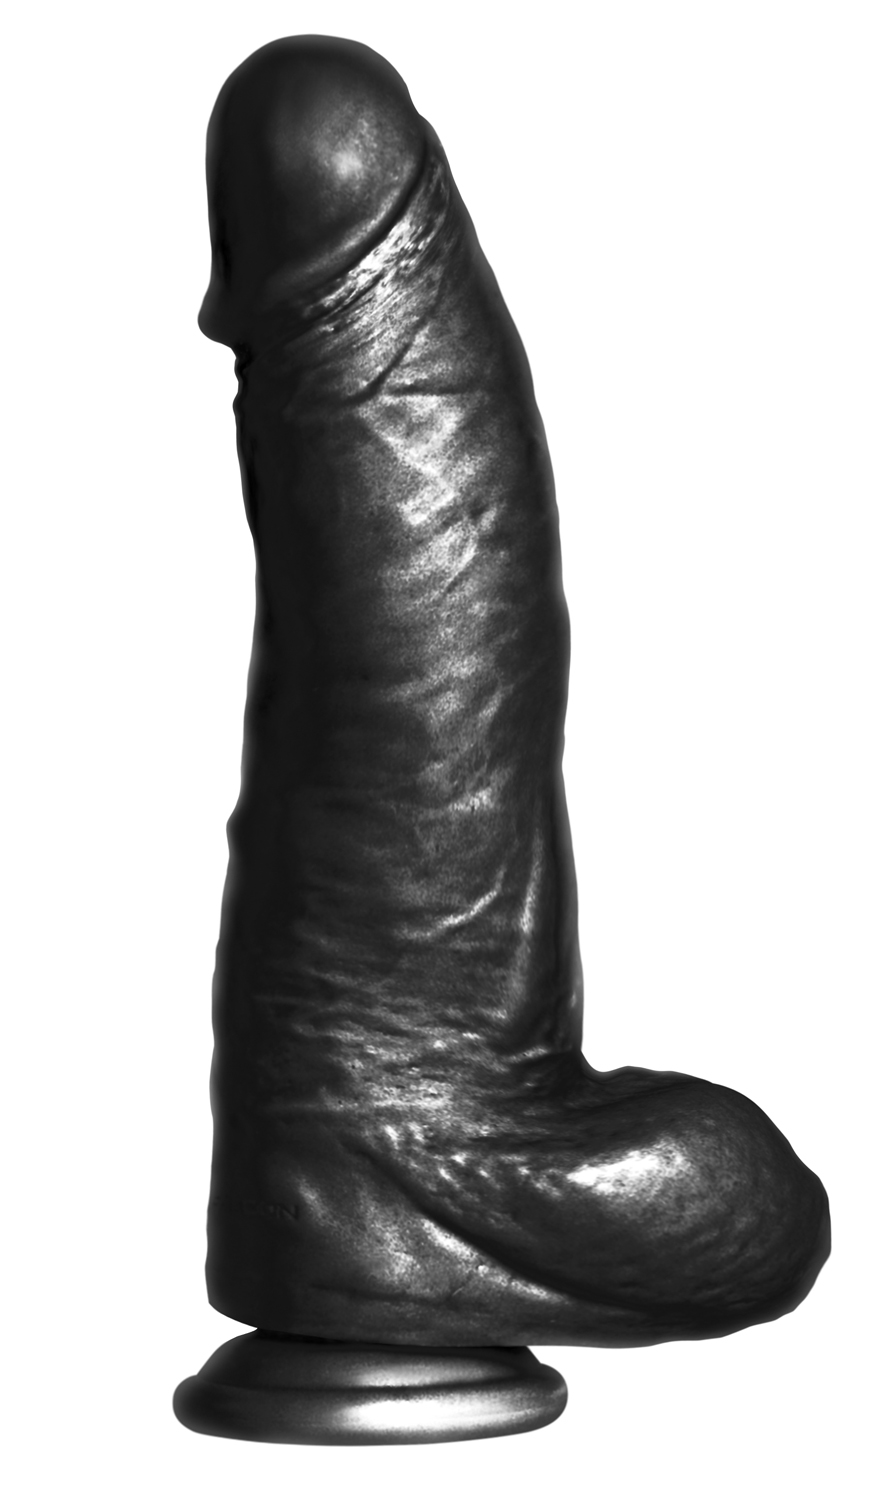 Falcon Big Black Cock Phat Boy 10 inches realistic dildo with suction cup b...